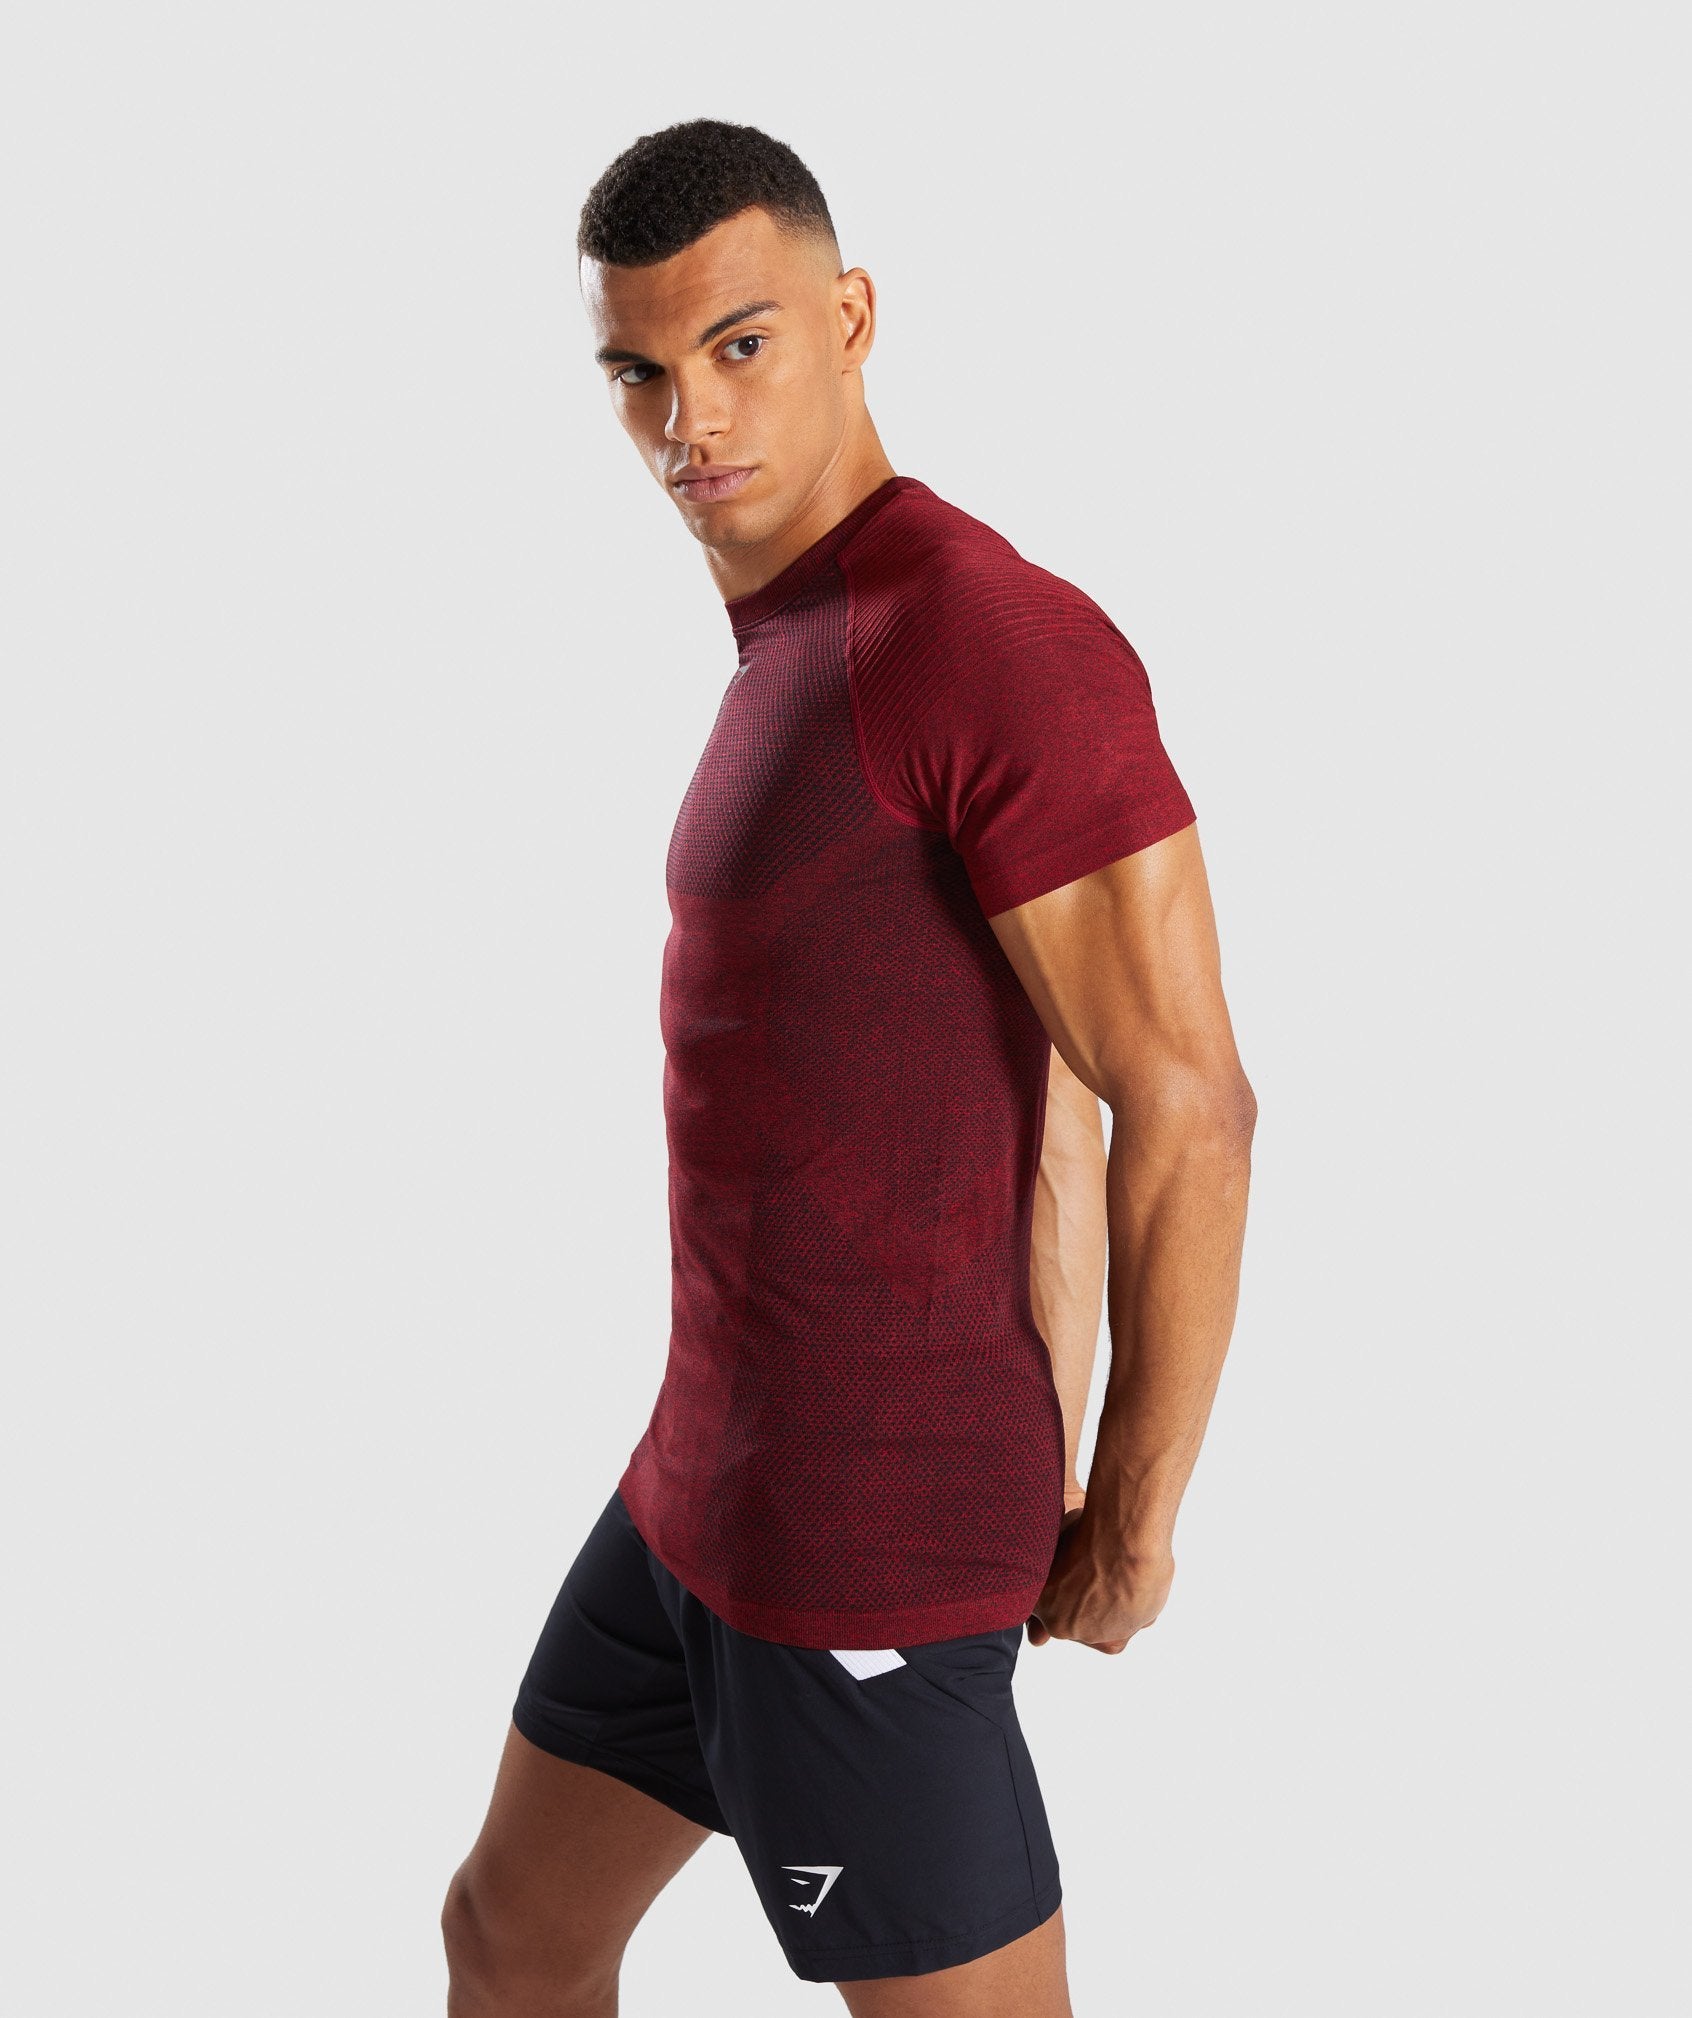 Premium Seamless T-Shirt in Red Marl - view 3